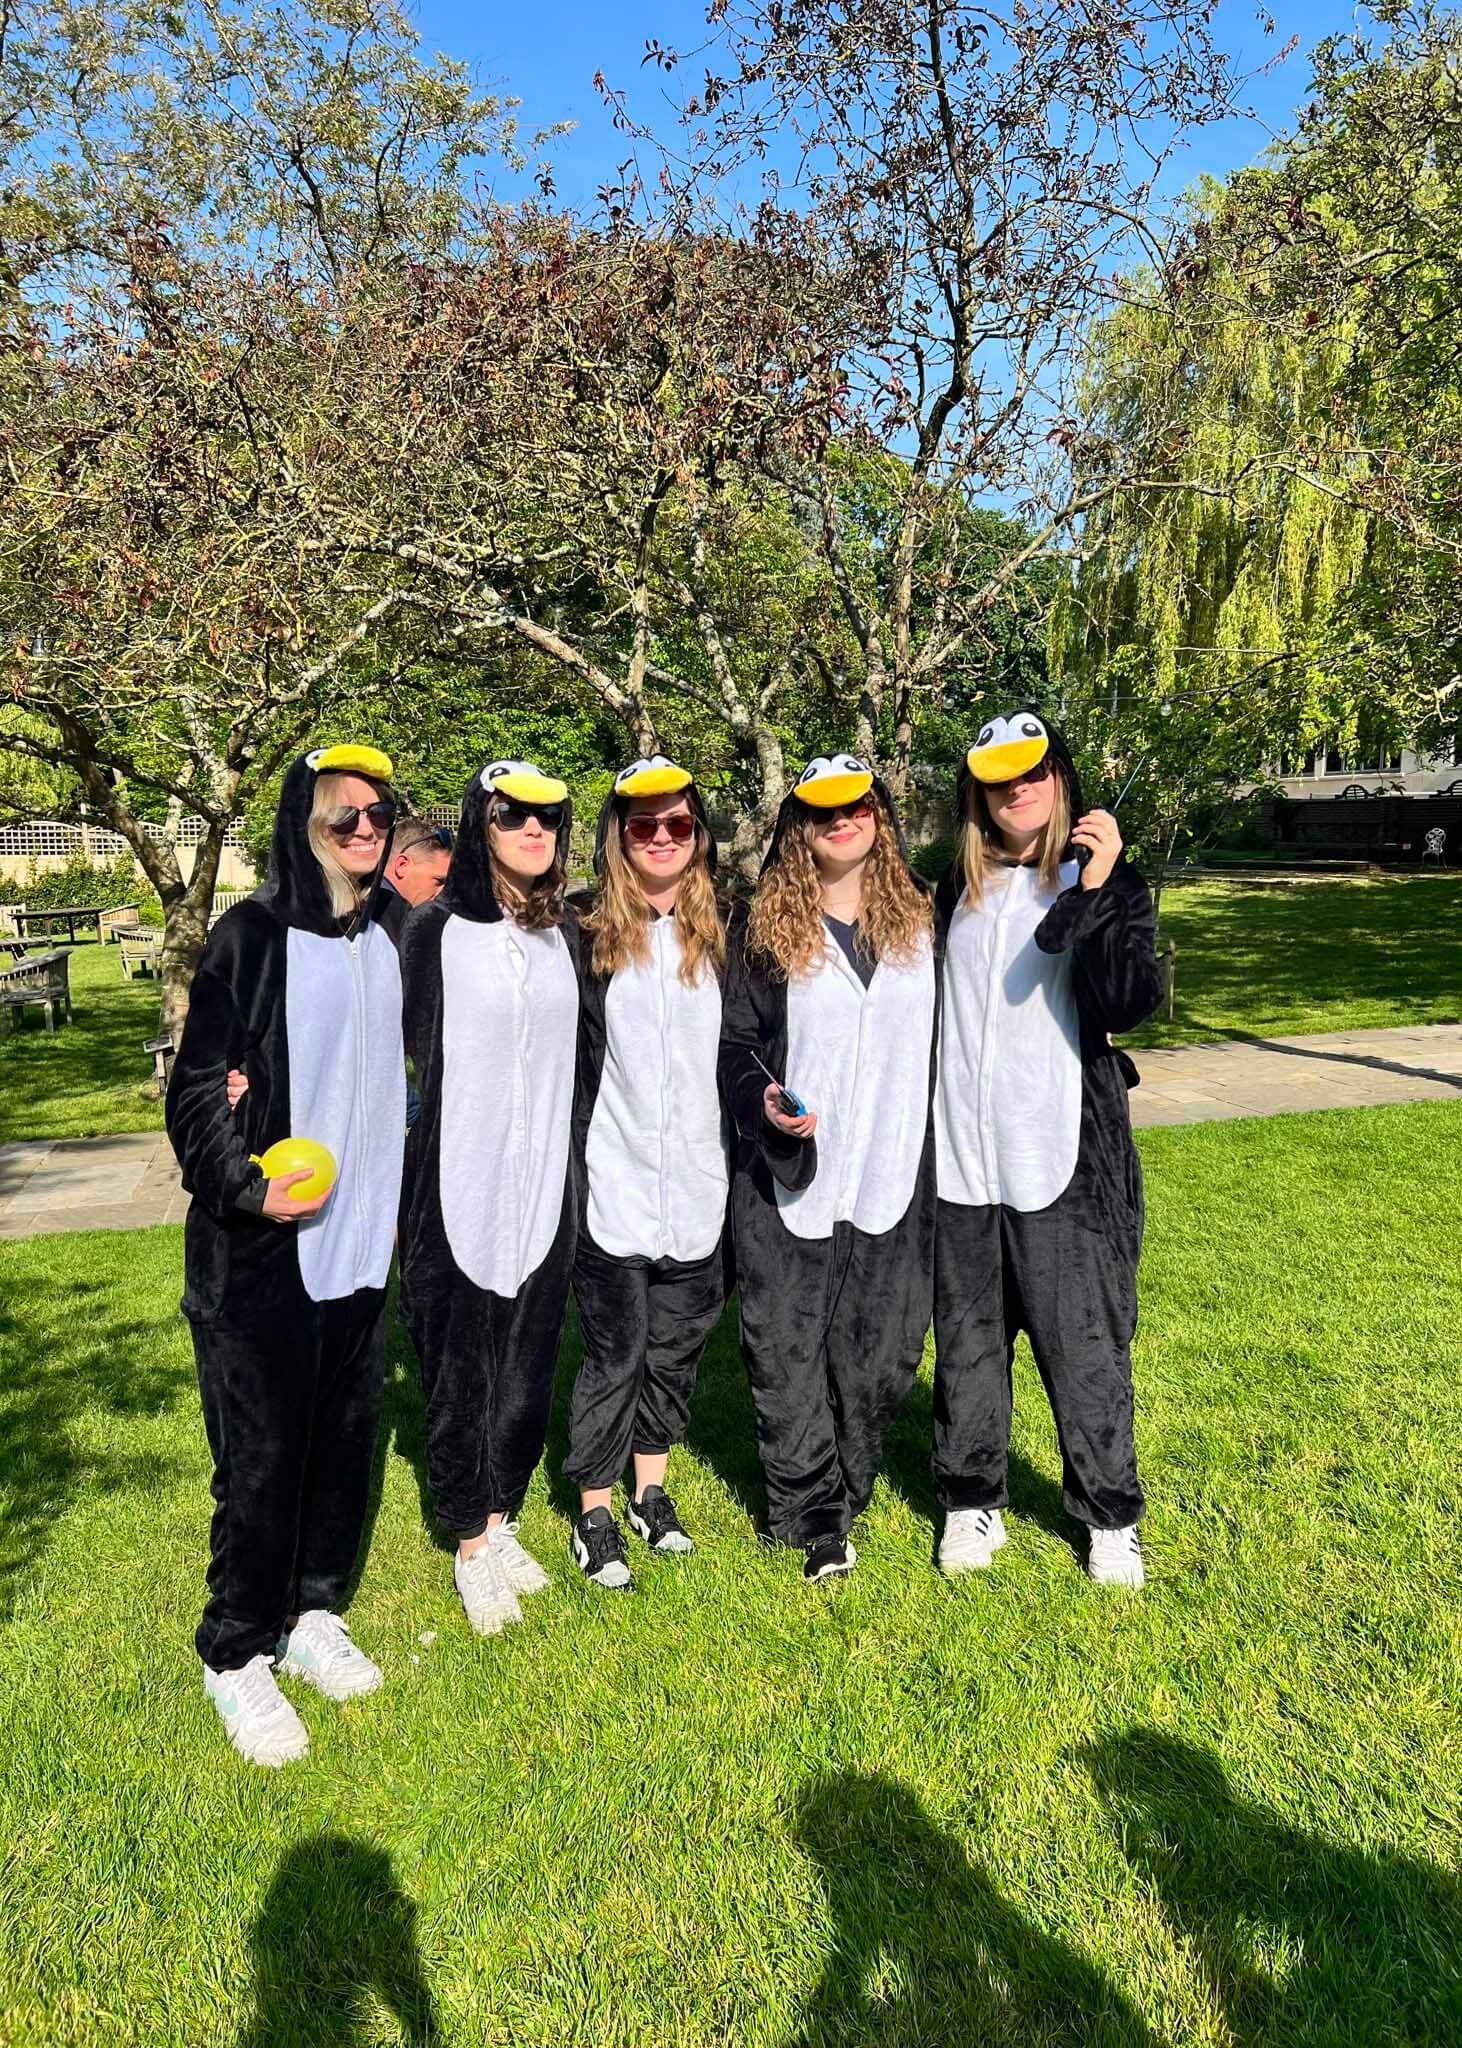 Upper sixth form pupils in fancy dress for their last day at  Ibstock Place School, a private school near Richmond, Barnes, Putney, Kingston, and Wandsworth on an overseas trip. 